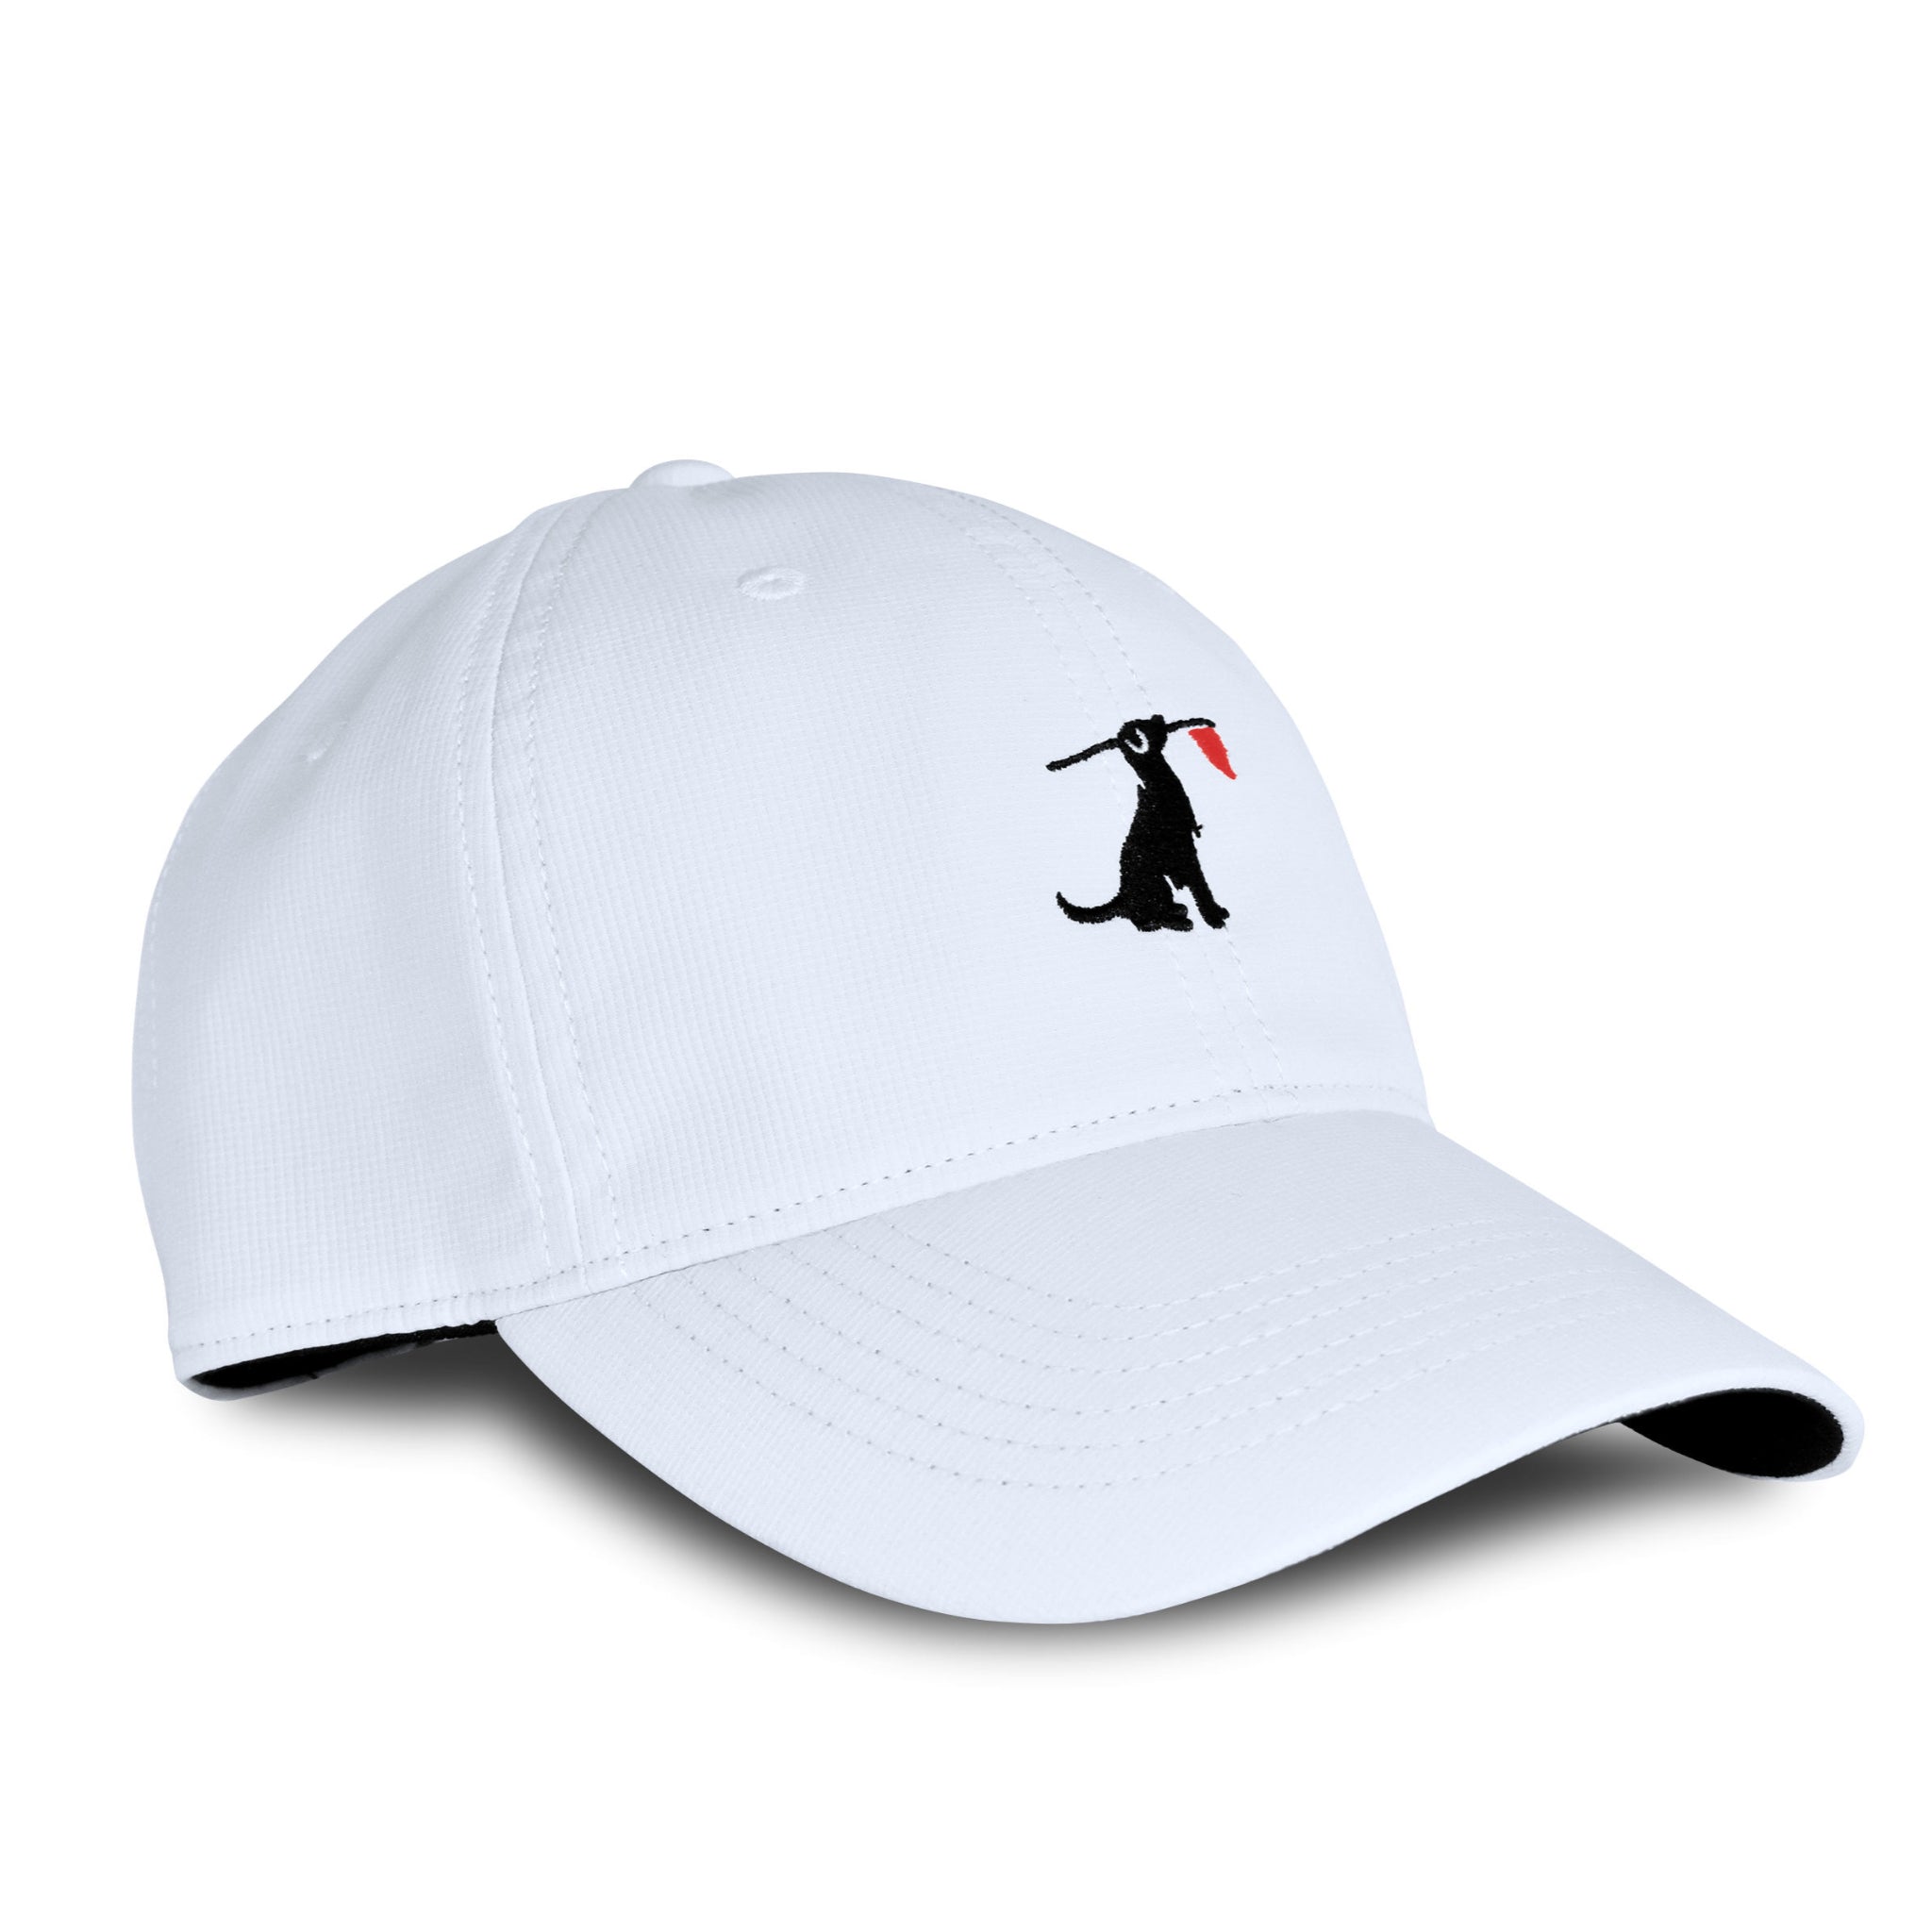 The Ace White Performance Hat - New!